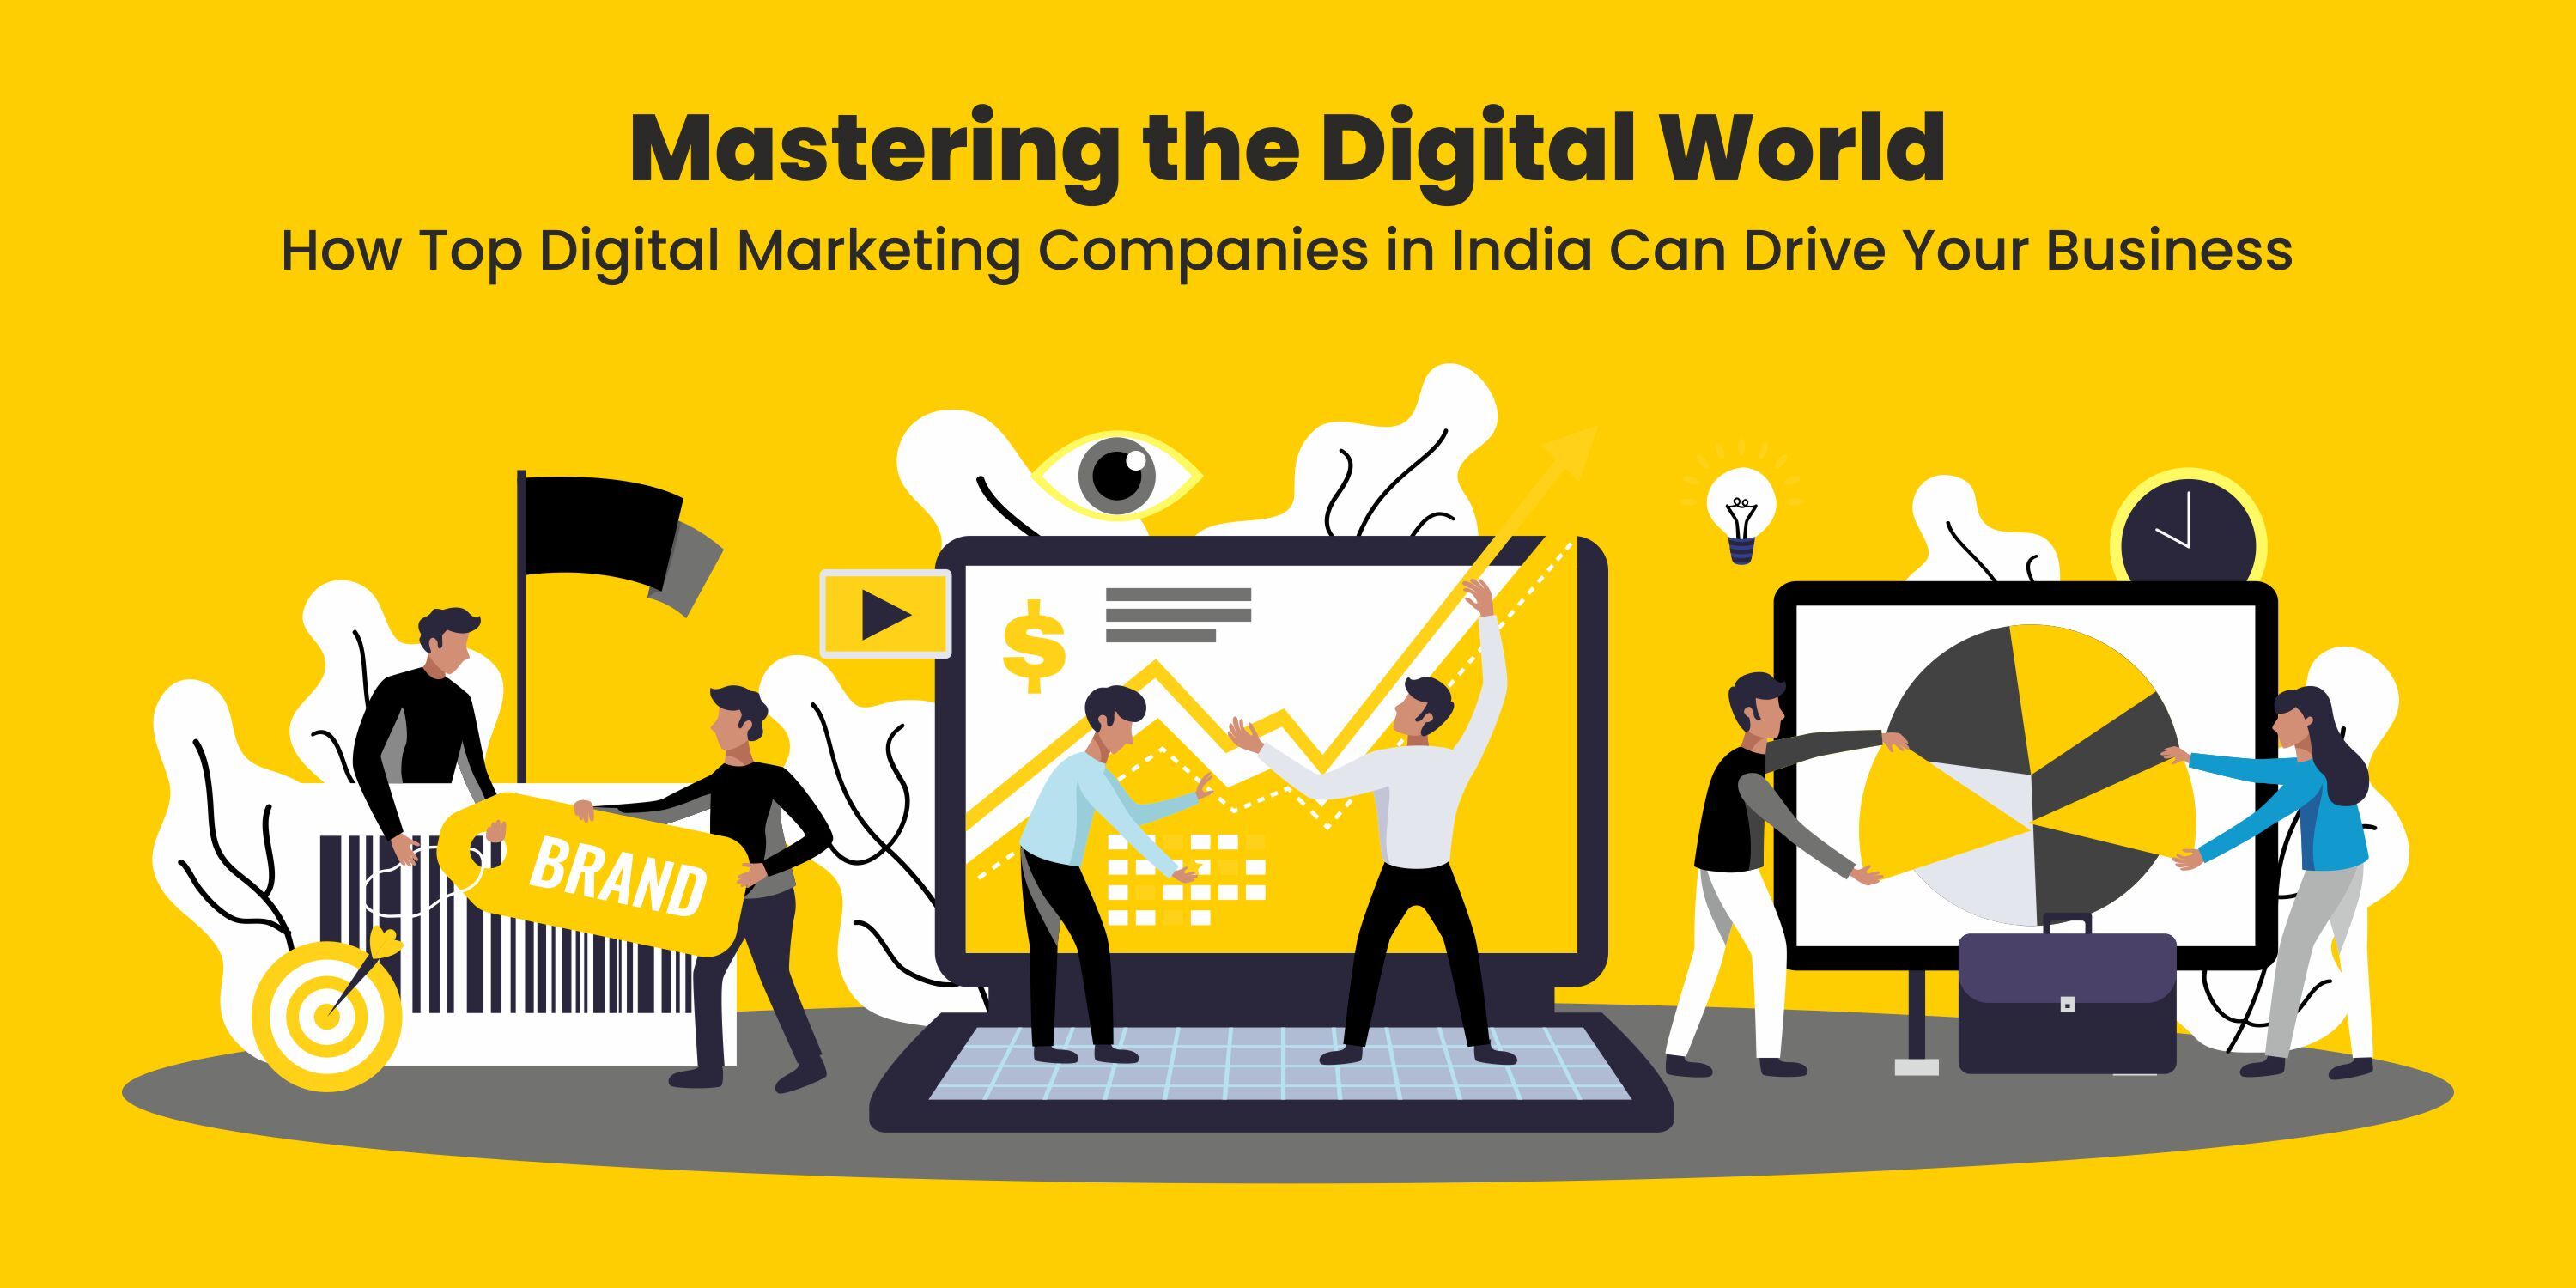 Mastering the Digital World: How Top Digital Marketing Companies in India Can Drive Your Business